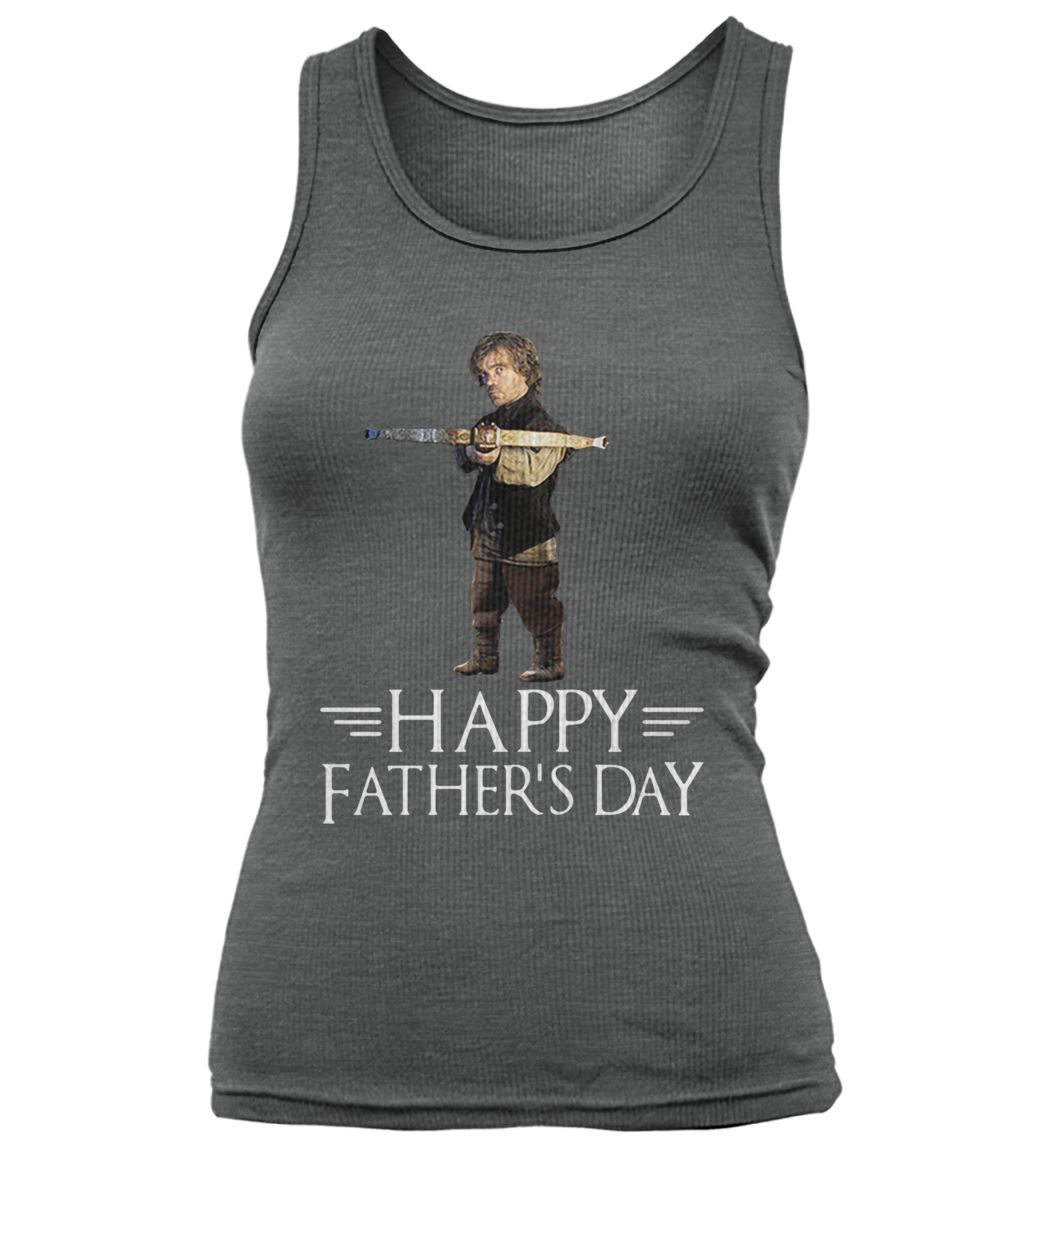 Tyrion lannister killing father happy father's day game of thrones women's tank top